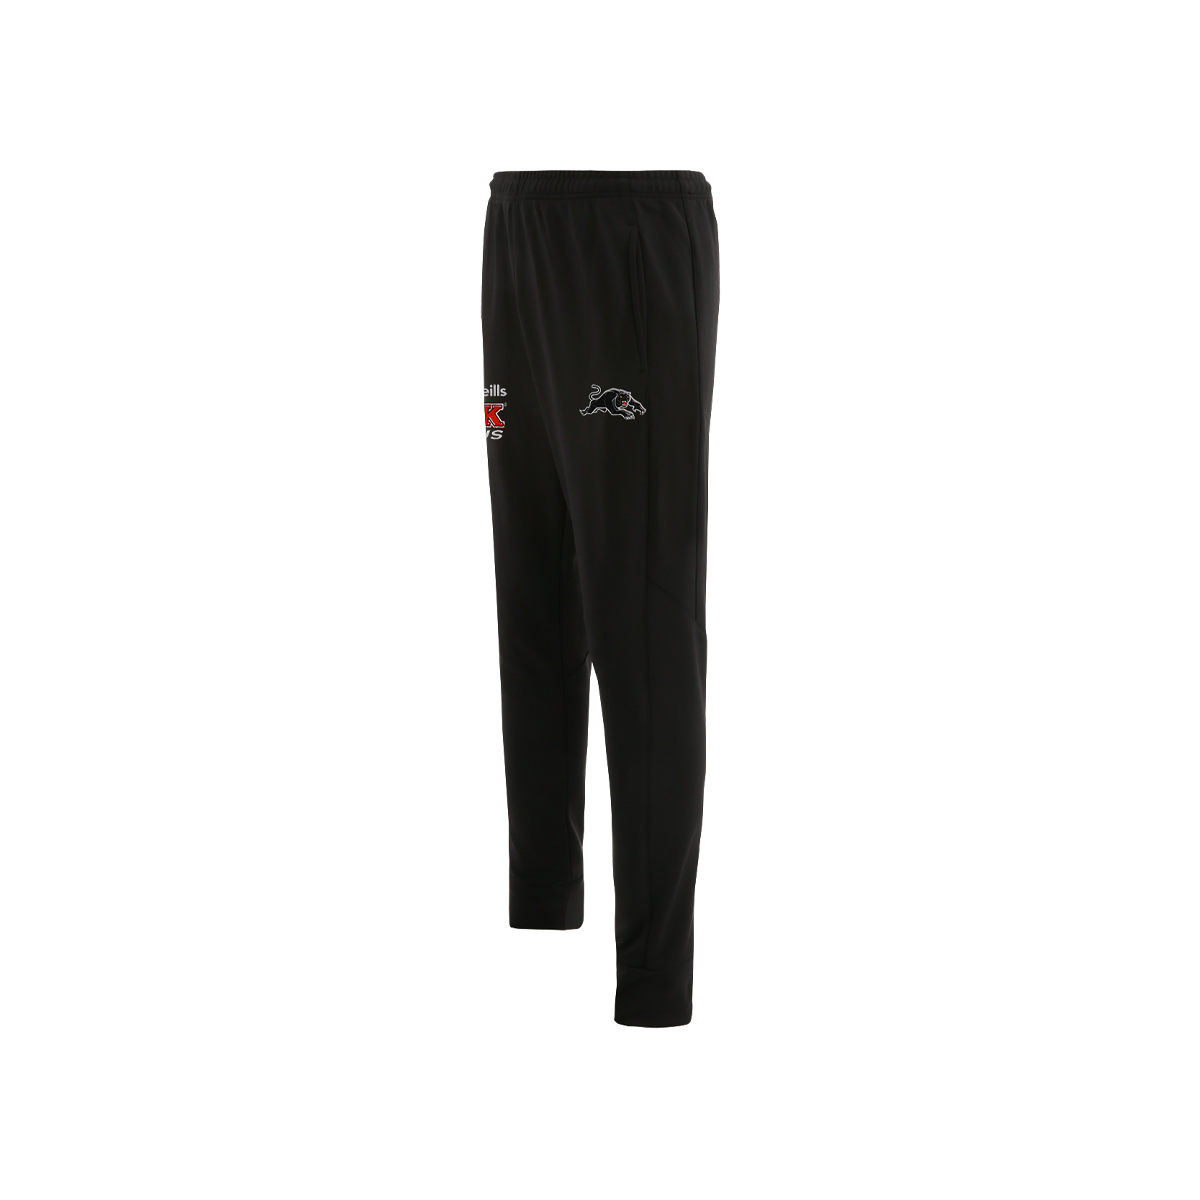 Penrith Panthers Tracksuit Pants 23